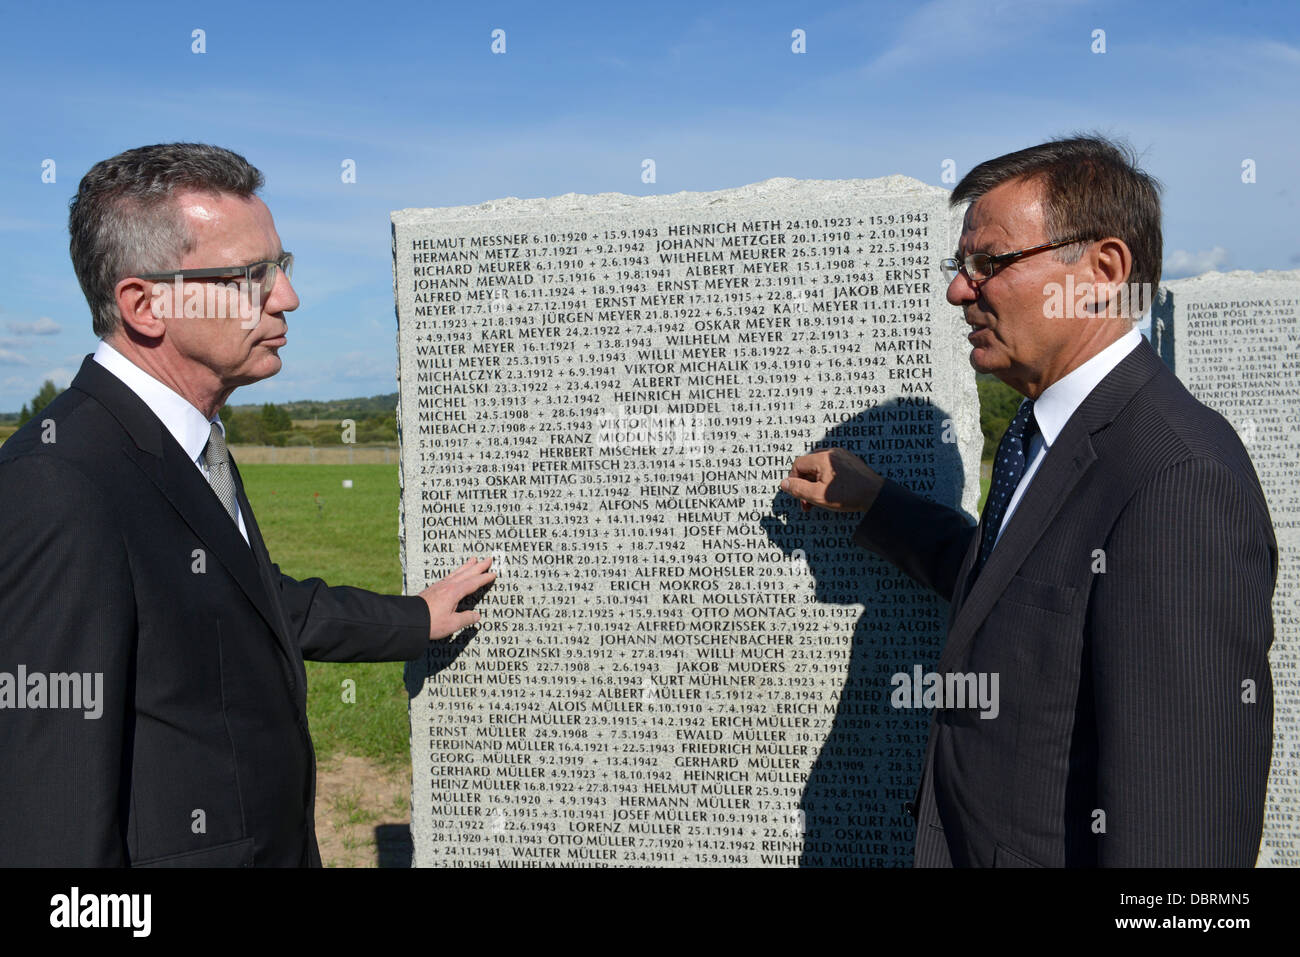 Reinhard Fuehrer (L), President of the German War Graves Commission, and Defence Minister Thomas de Maiziere (L) stands at a granite slab with the names of dead German soldiers engraved on it during the dedication of the German military cemetery in Dukhovshchina, Smolensk Oblast, Russia, 03 August 2013. The cemetery is the last resting place for 70,000 German soldiers who died in Russia during World War II. Photo: UWE ZUCCHI Stock Photo